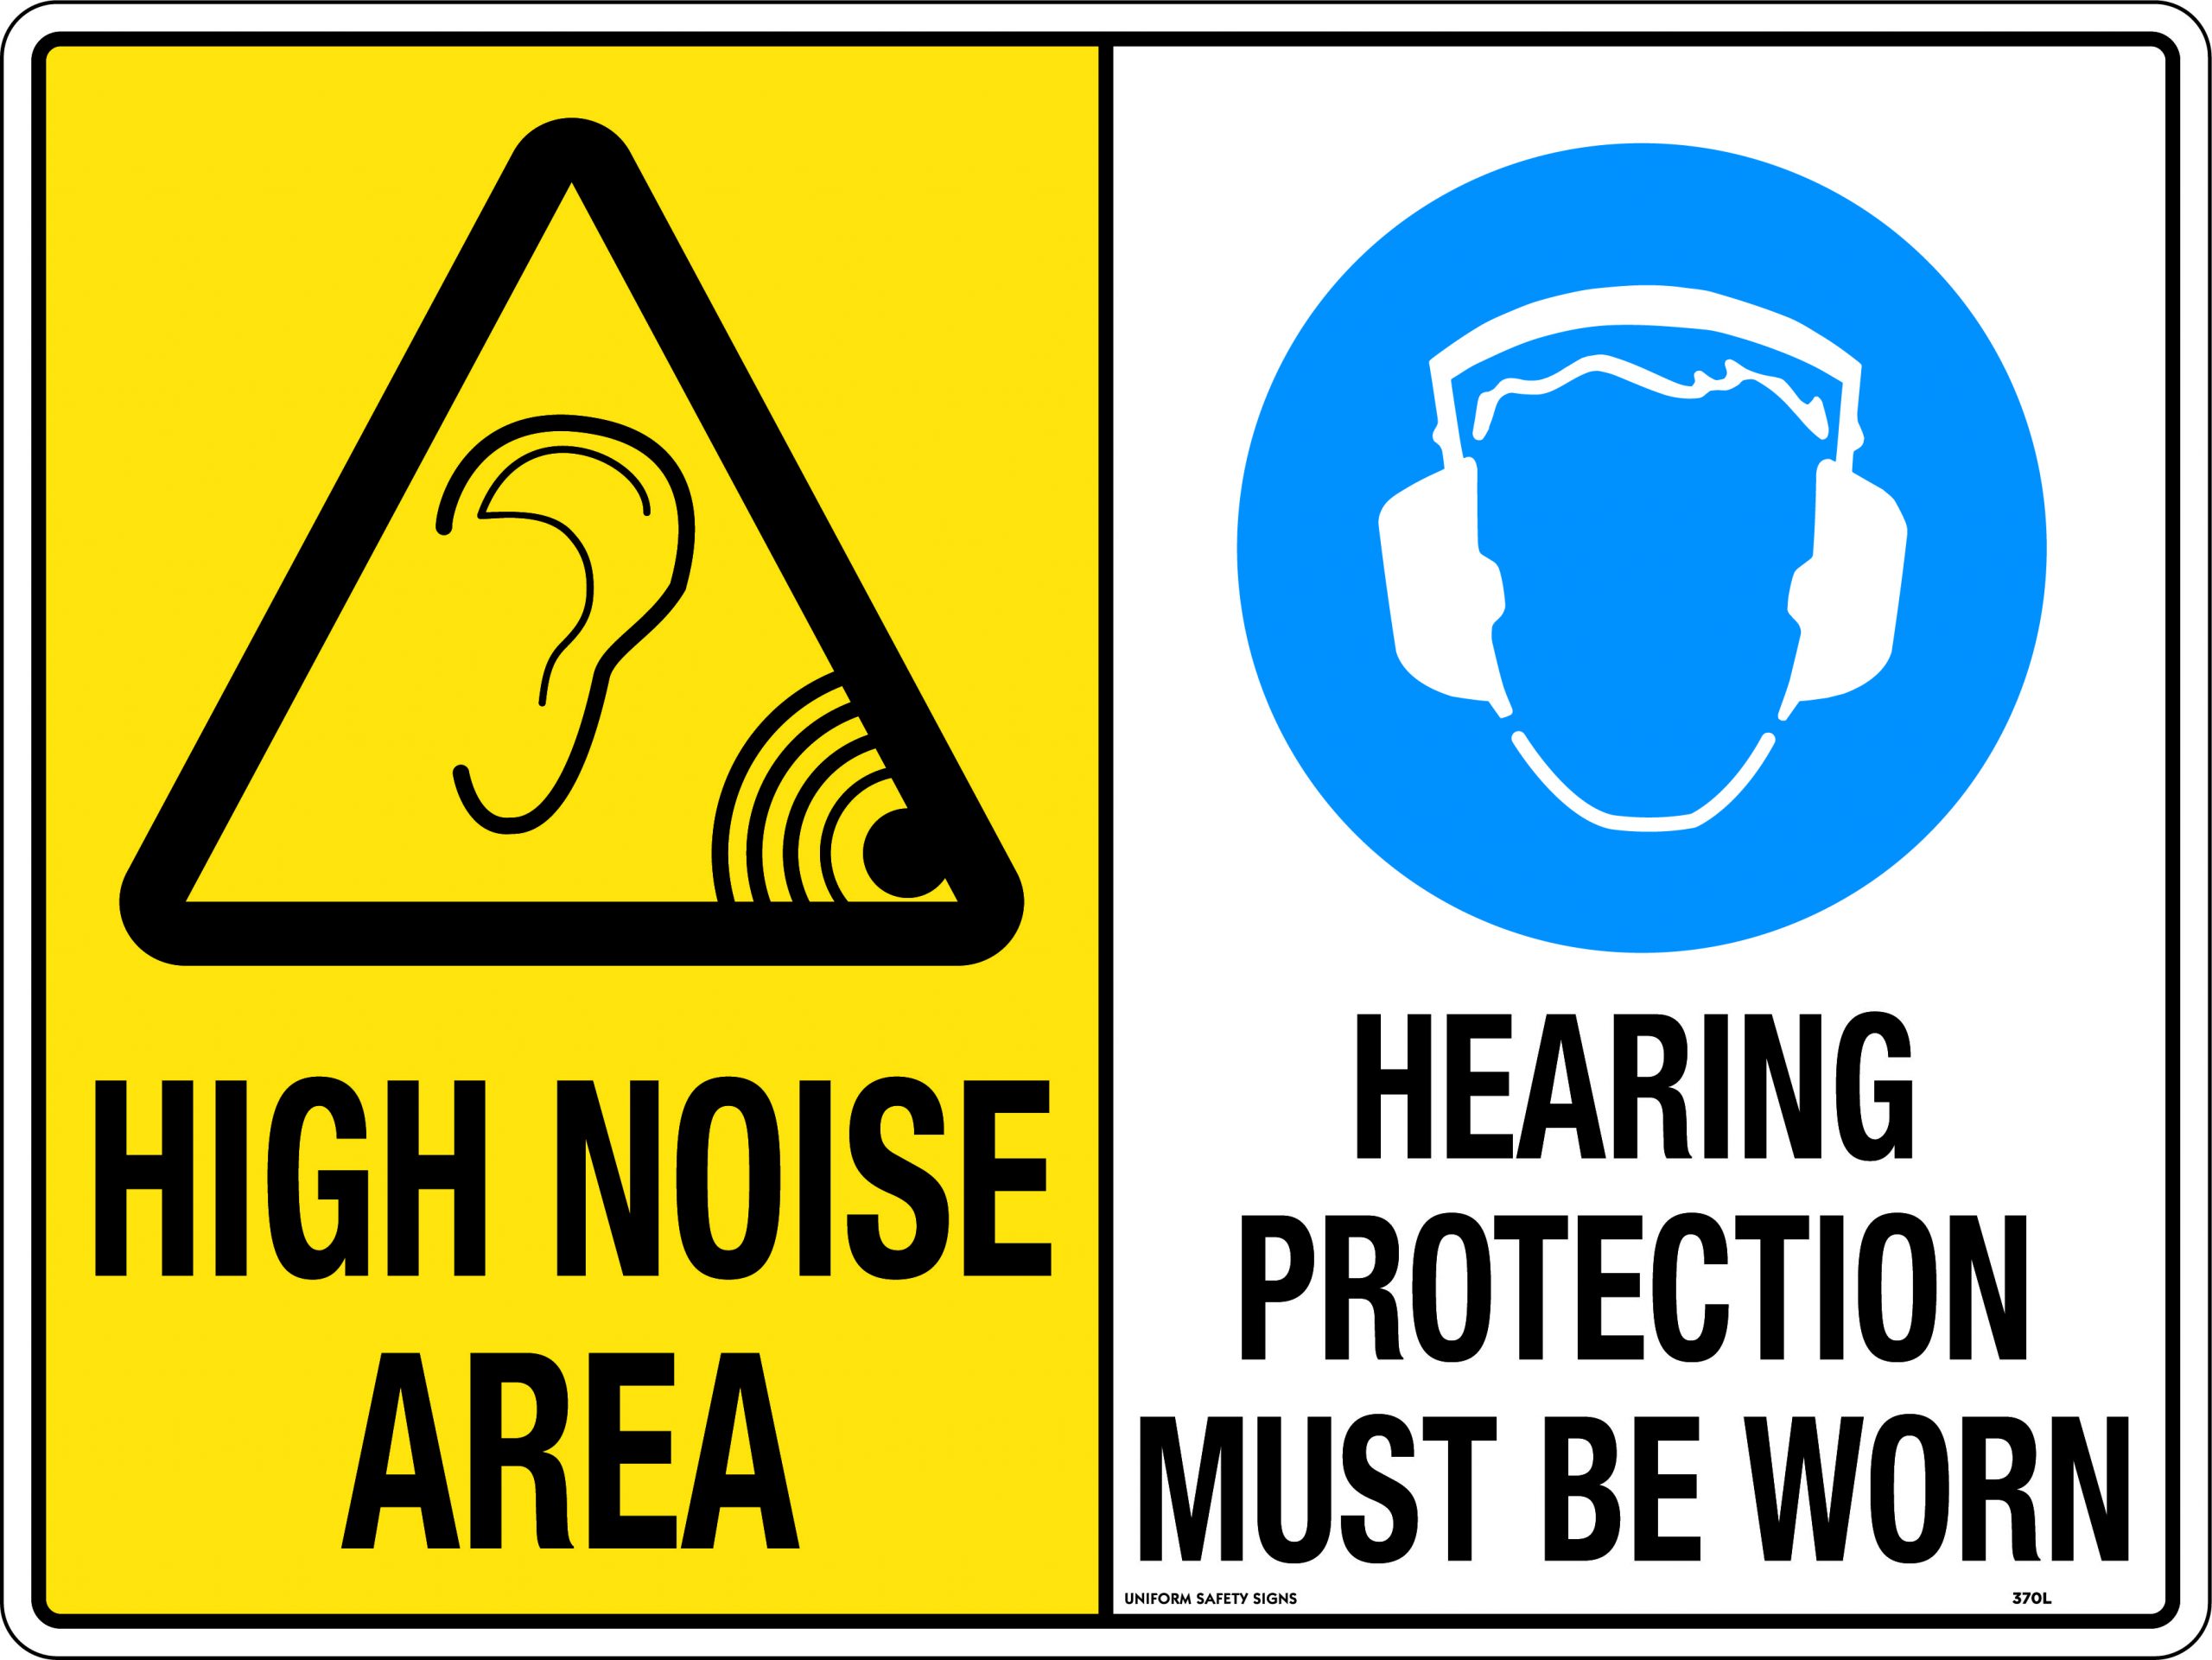 UNIFORM SAFETY 600X450MM POLY MULTI SIGN HIGH NOISE AREA/HEARING PROTE